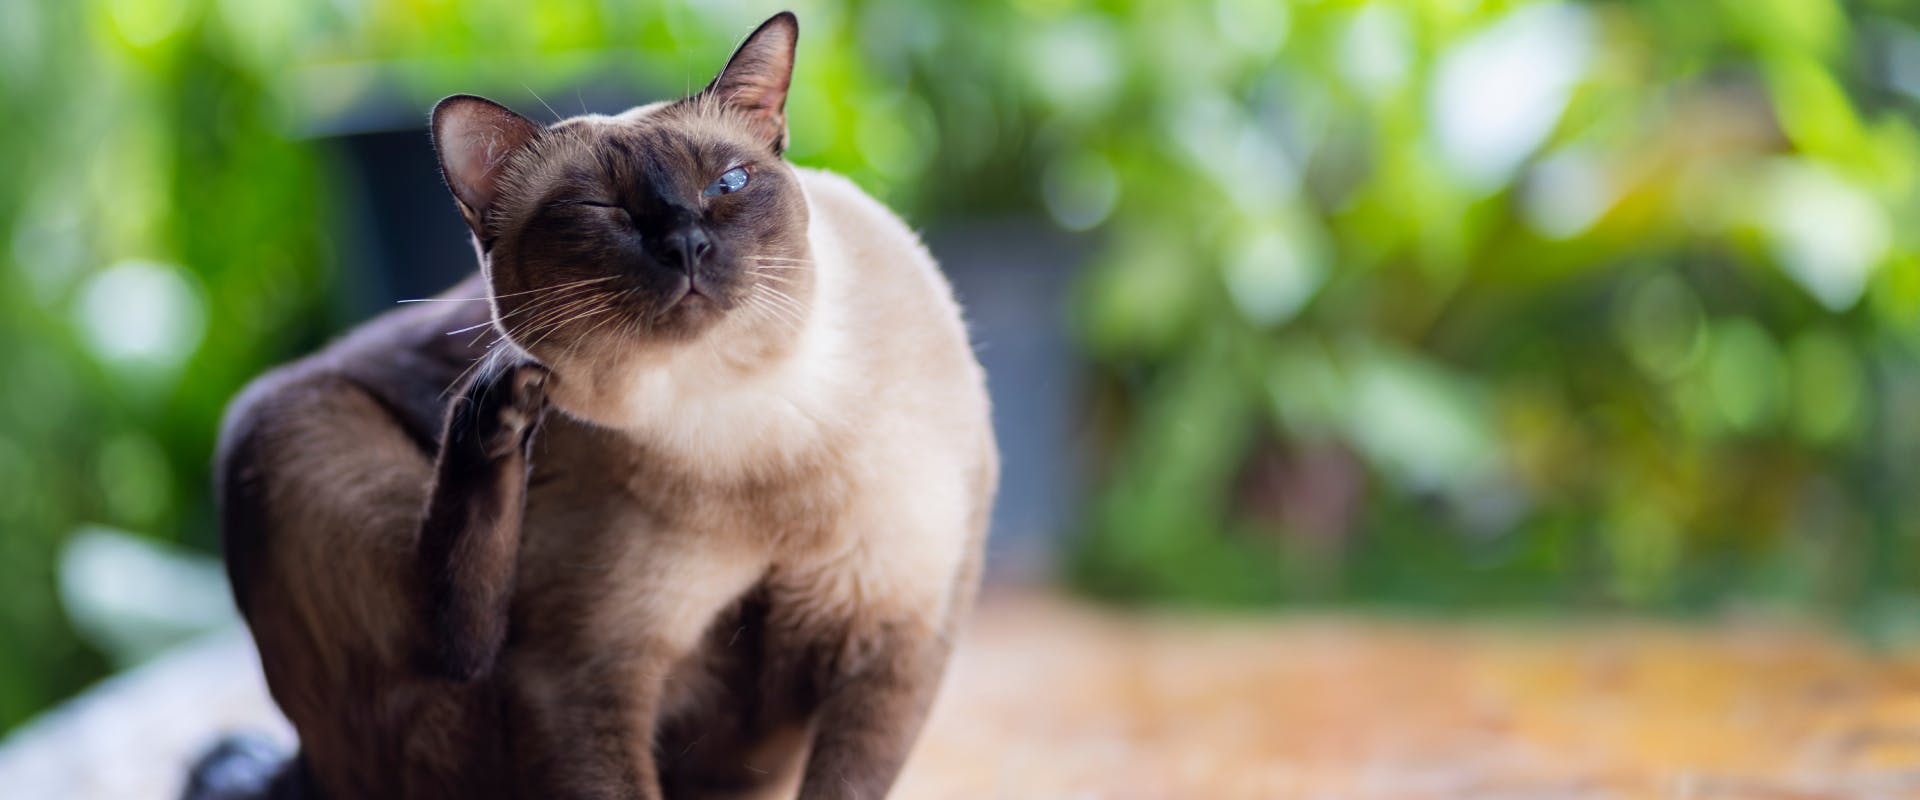 a siamese cat with blue eyes sitting on a wooden table while scratching its head with a back paw